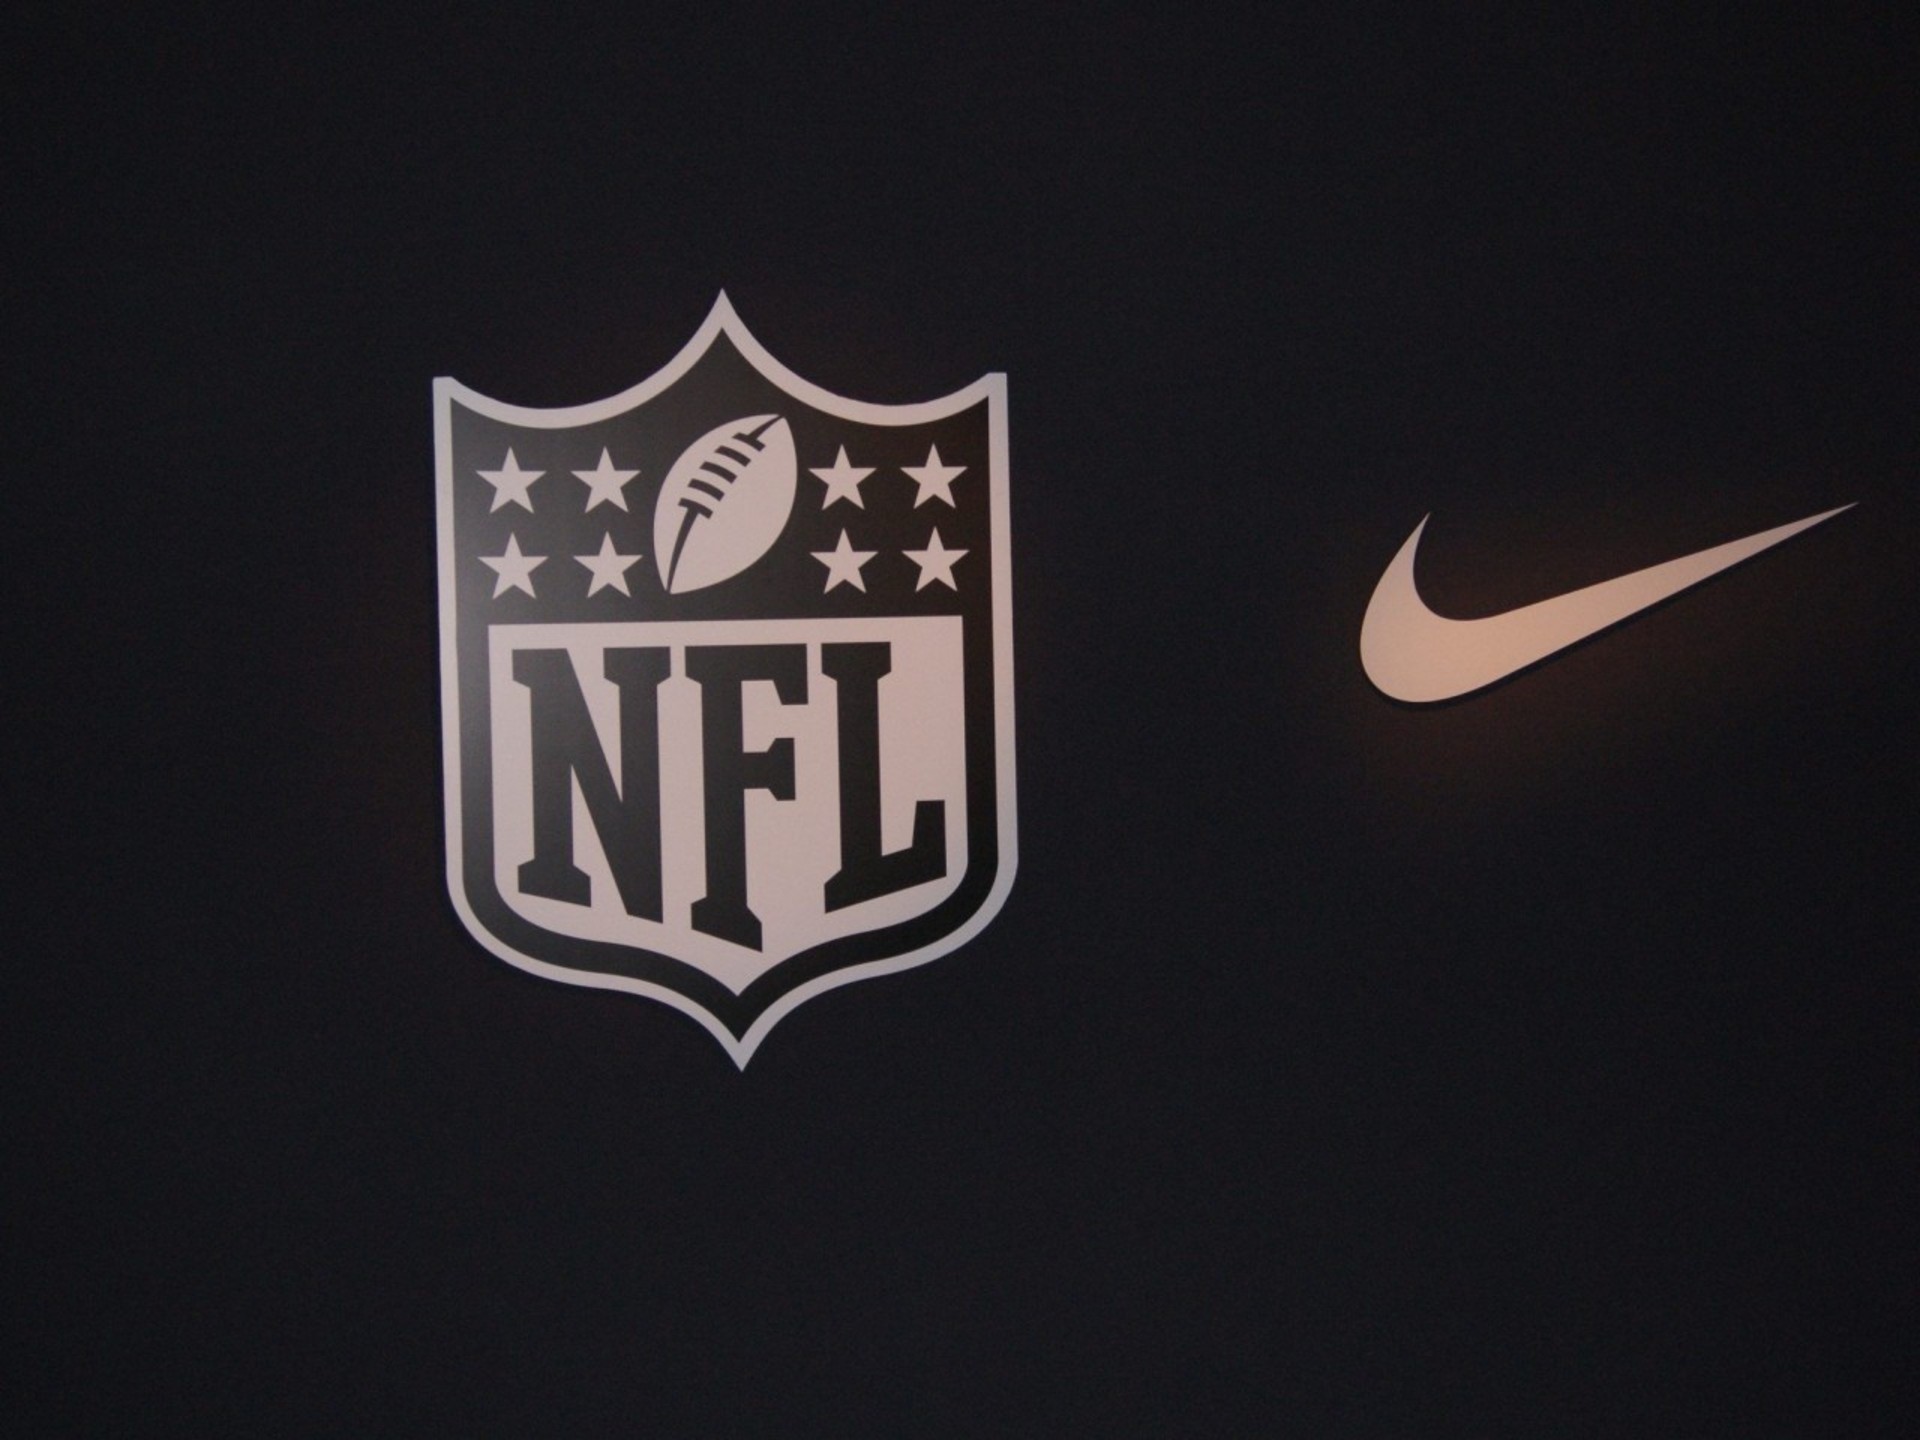 1920x1440 Nike Football Wallpaper Wallpapers For Laptops Amazing